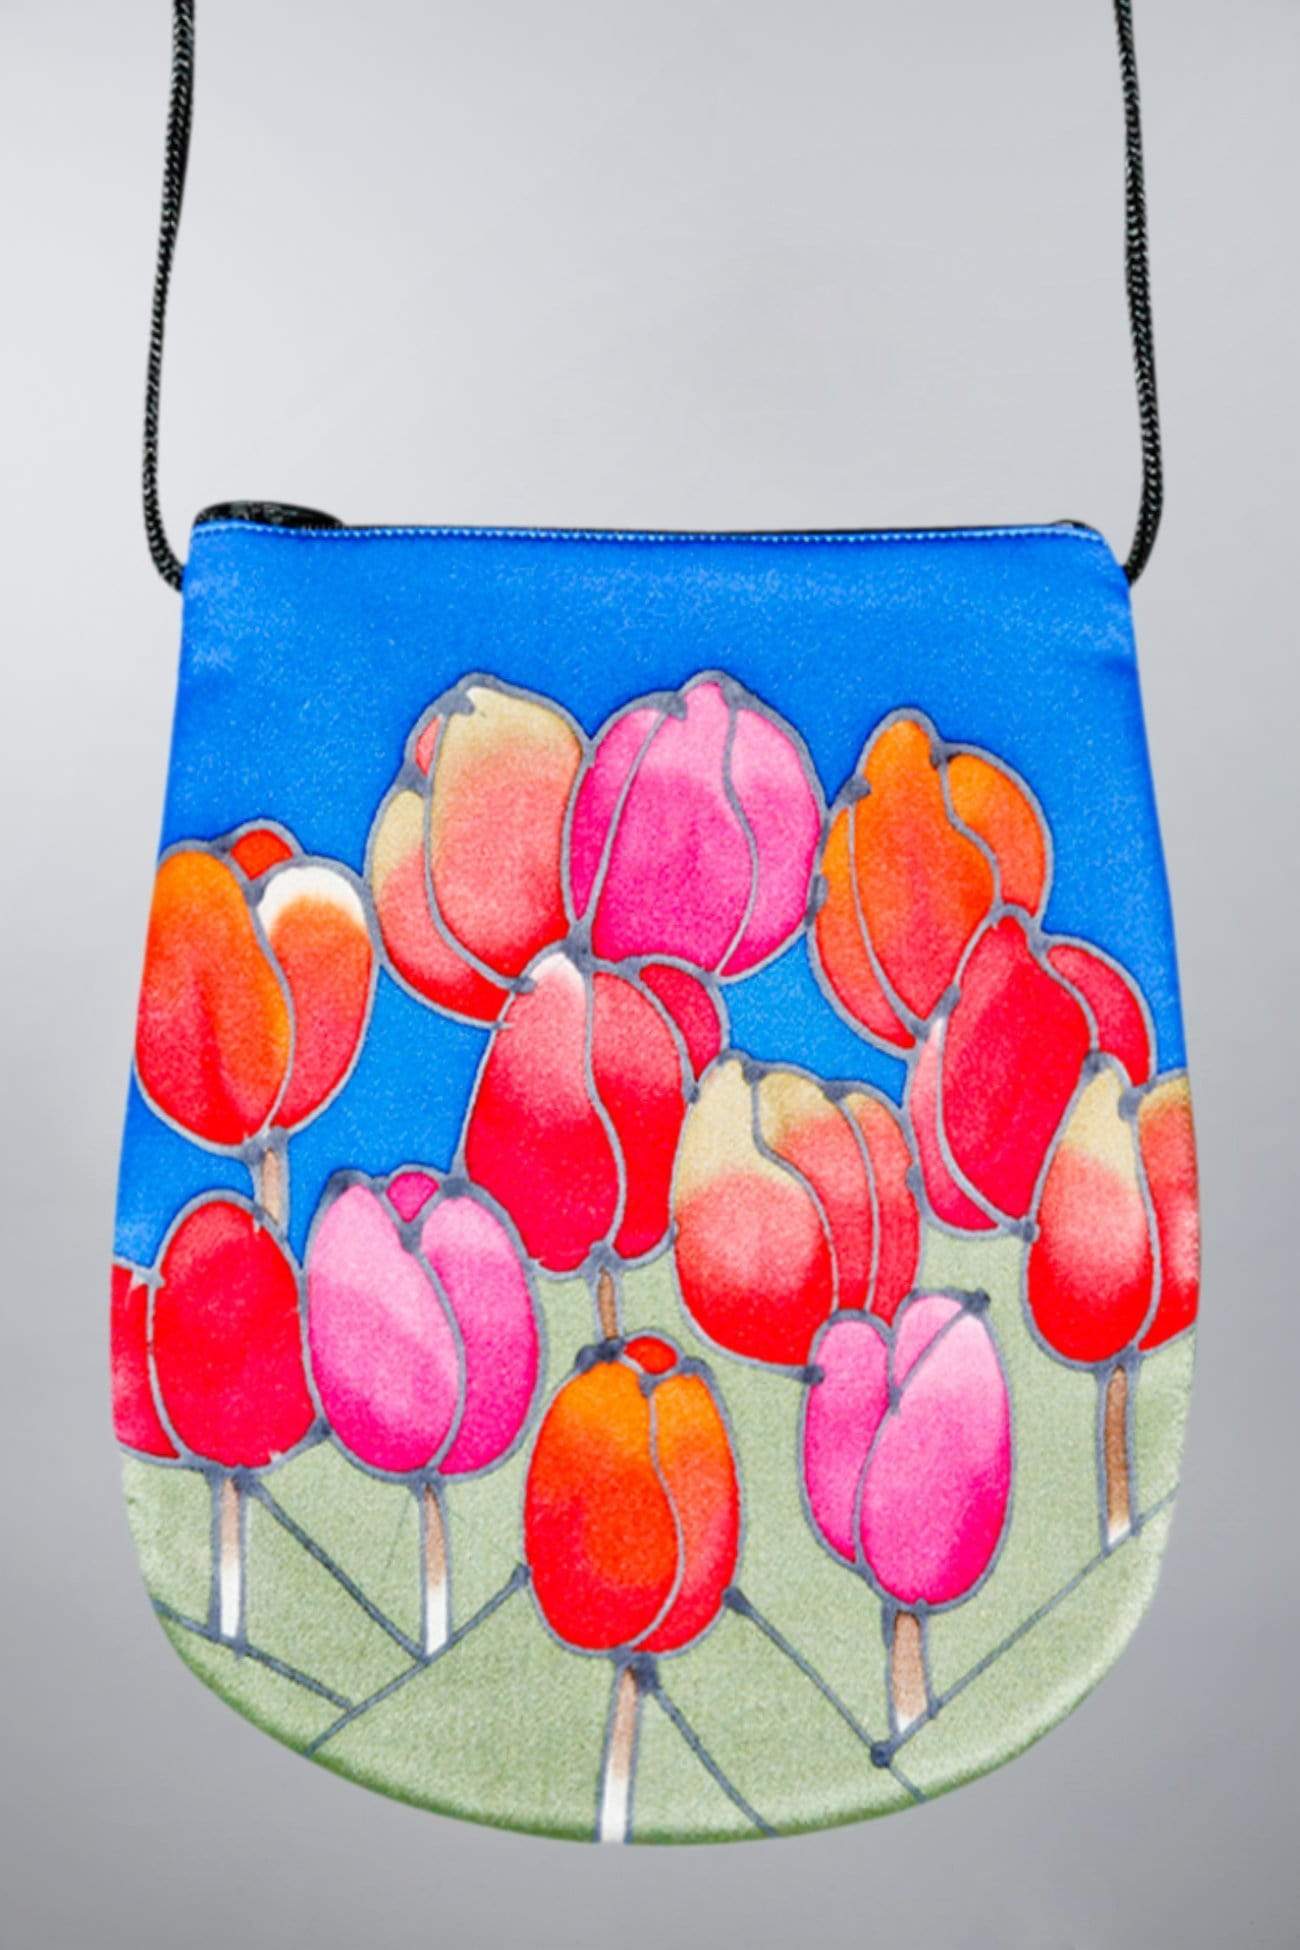 Leather Hand Painted Bags Price Starting From Rs 2,750/Unit | Find Verified  Sellers at Justdial